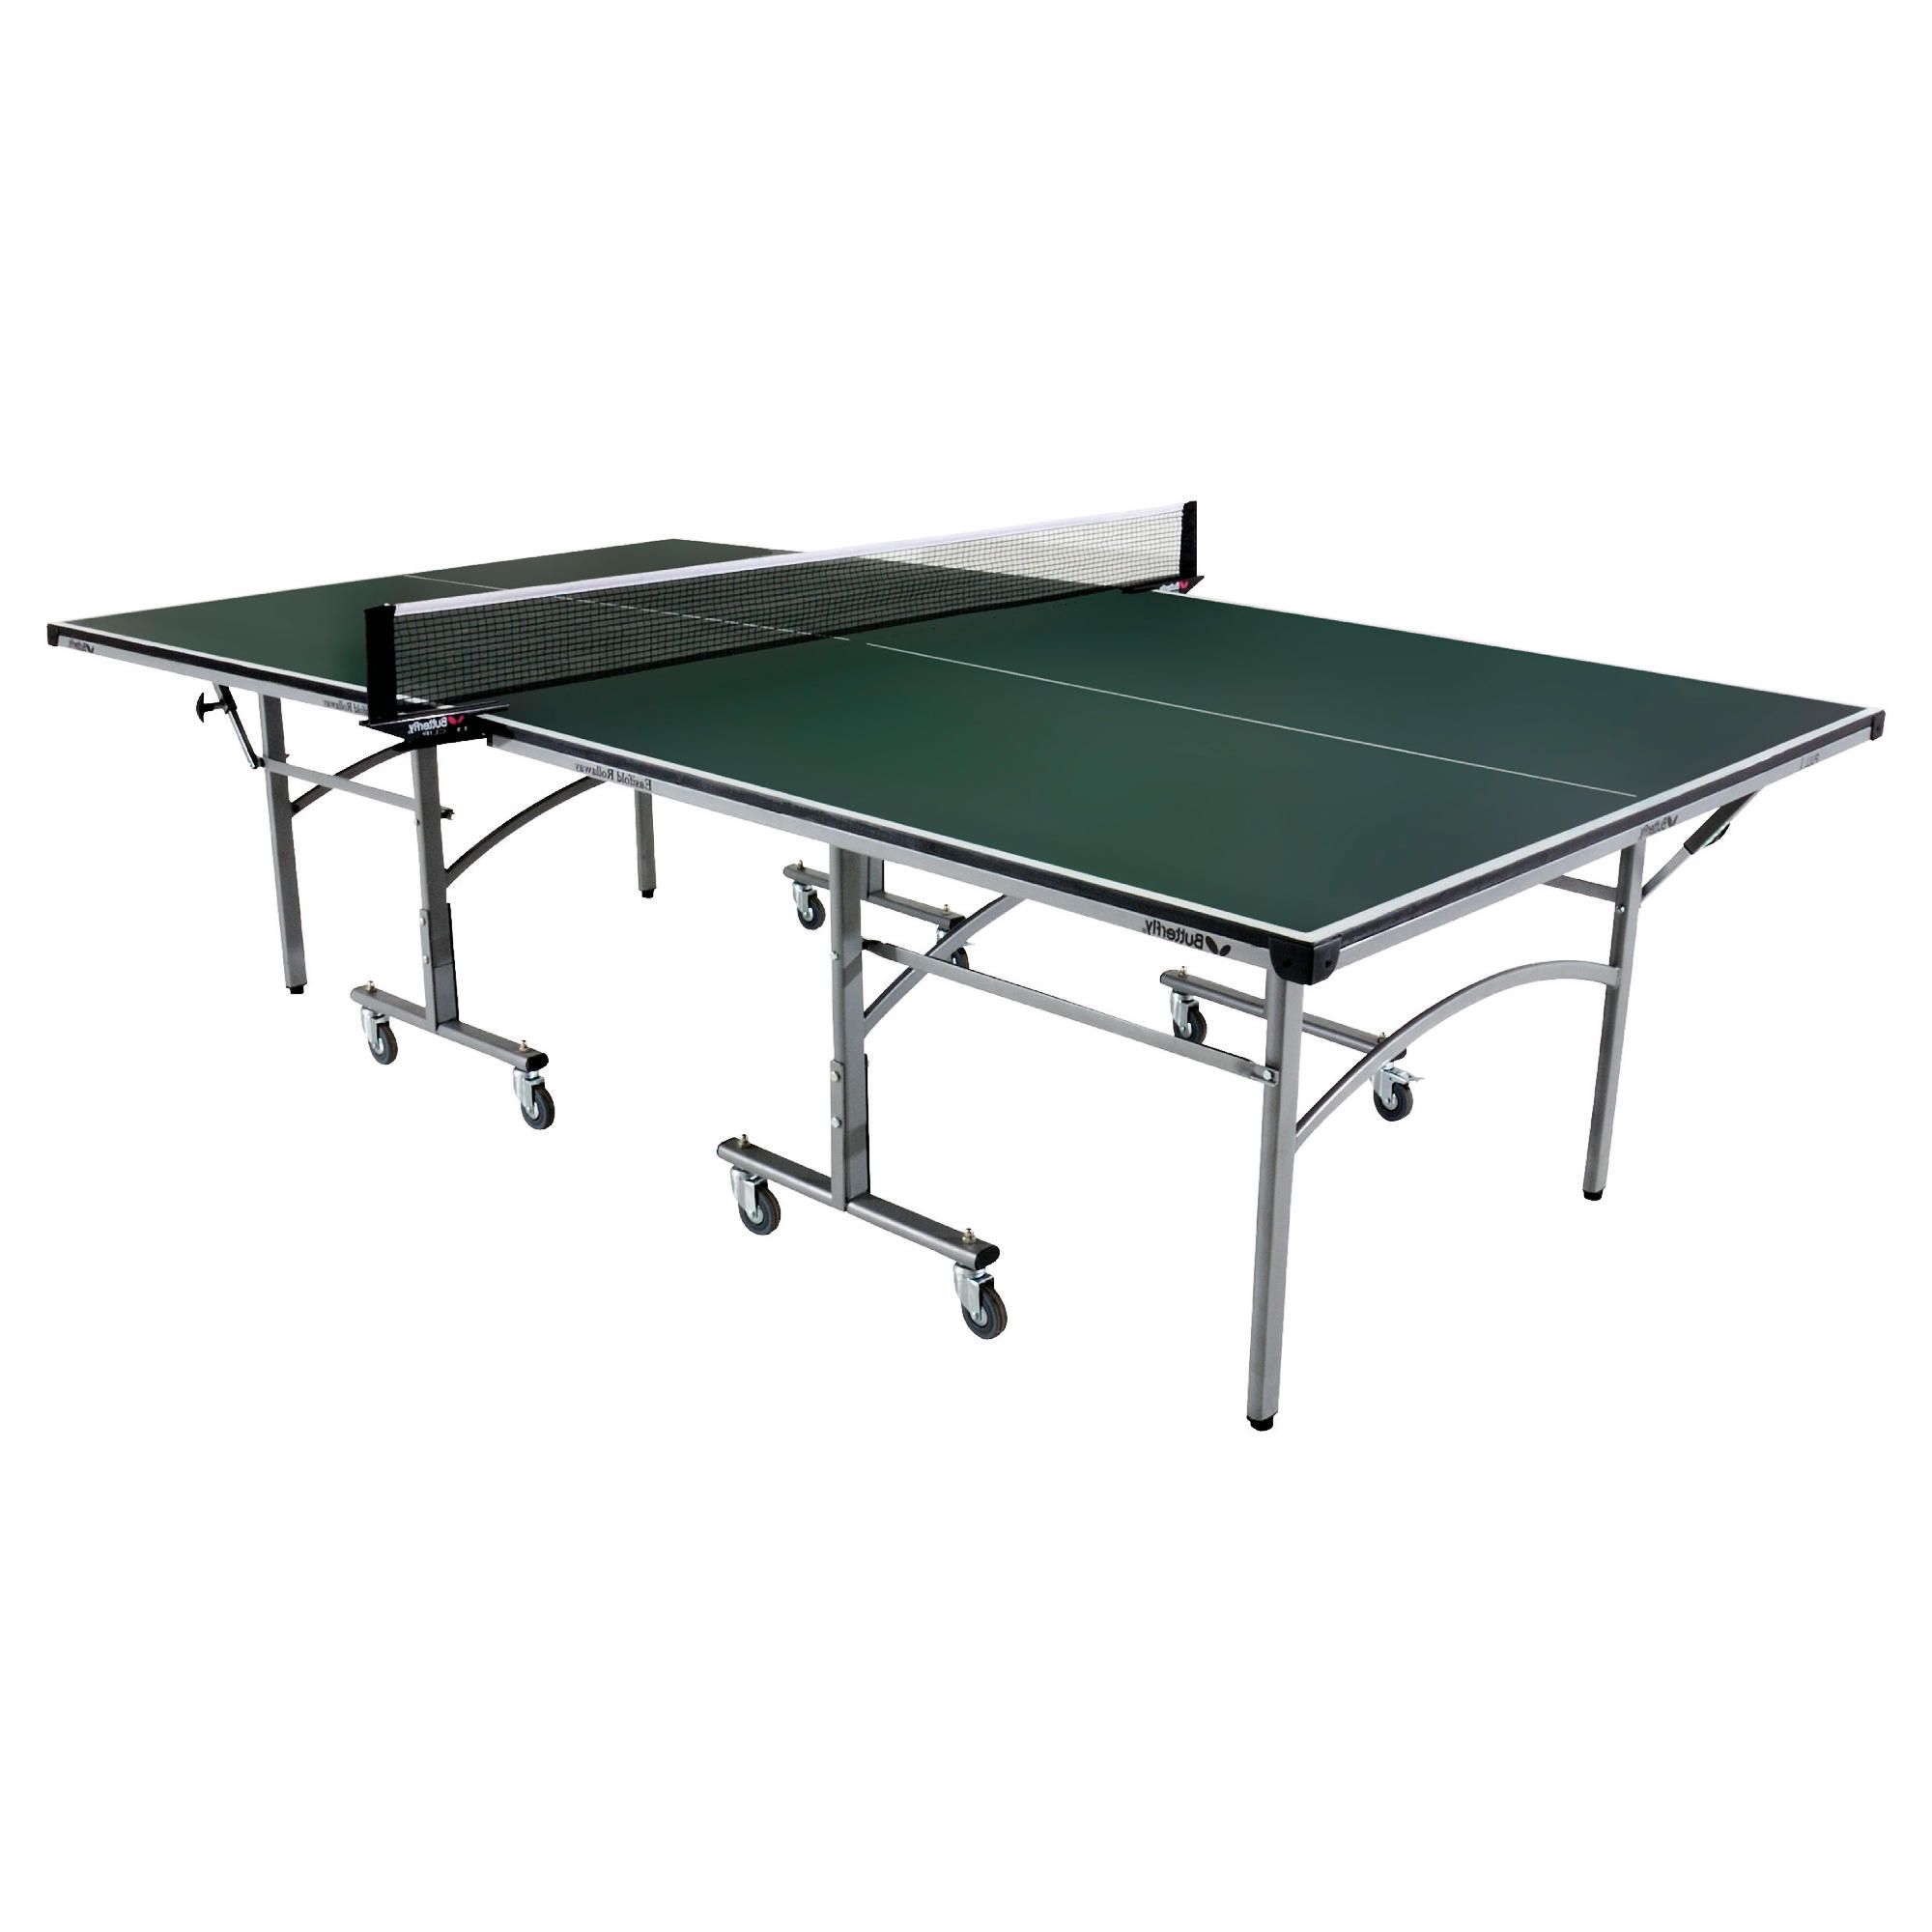 Butterfly Easifold Indoor Table Tennis Table - Green at Tesco Direct